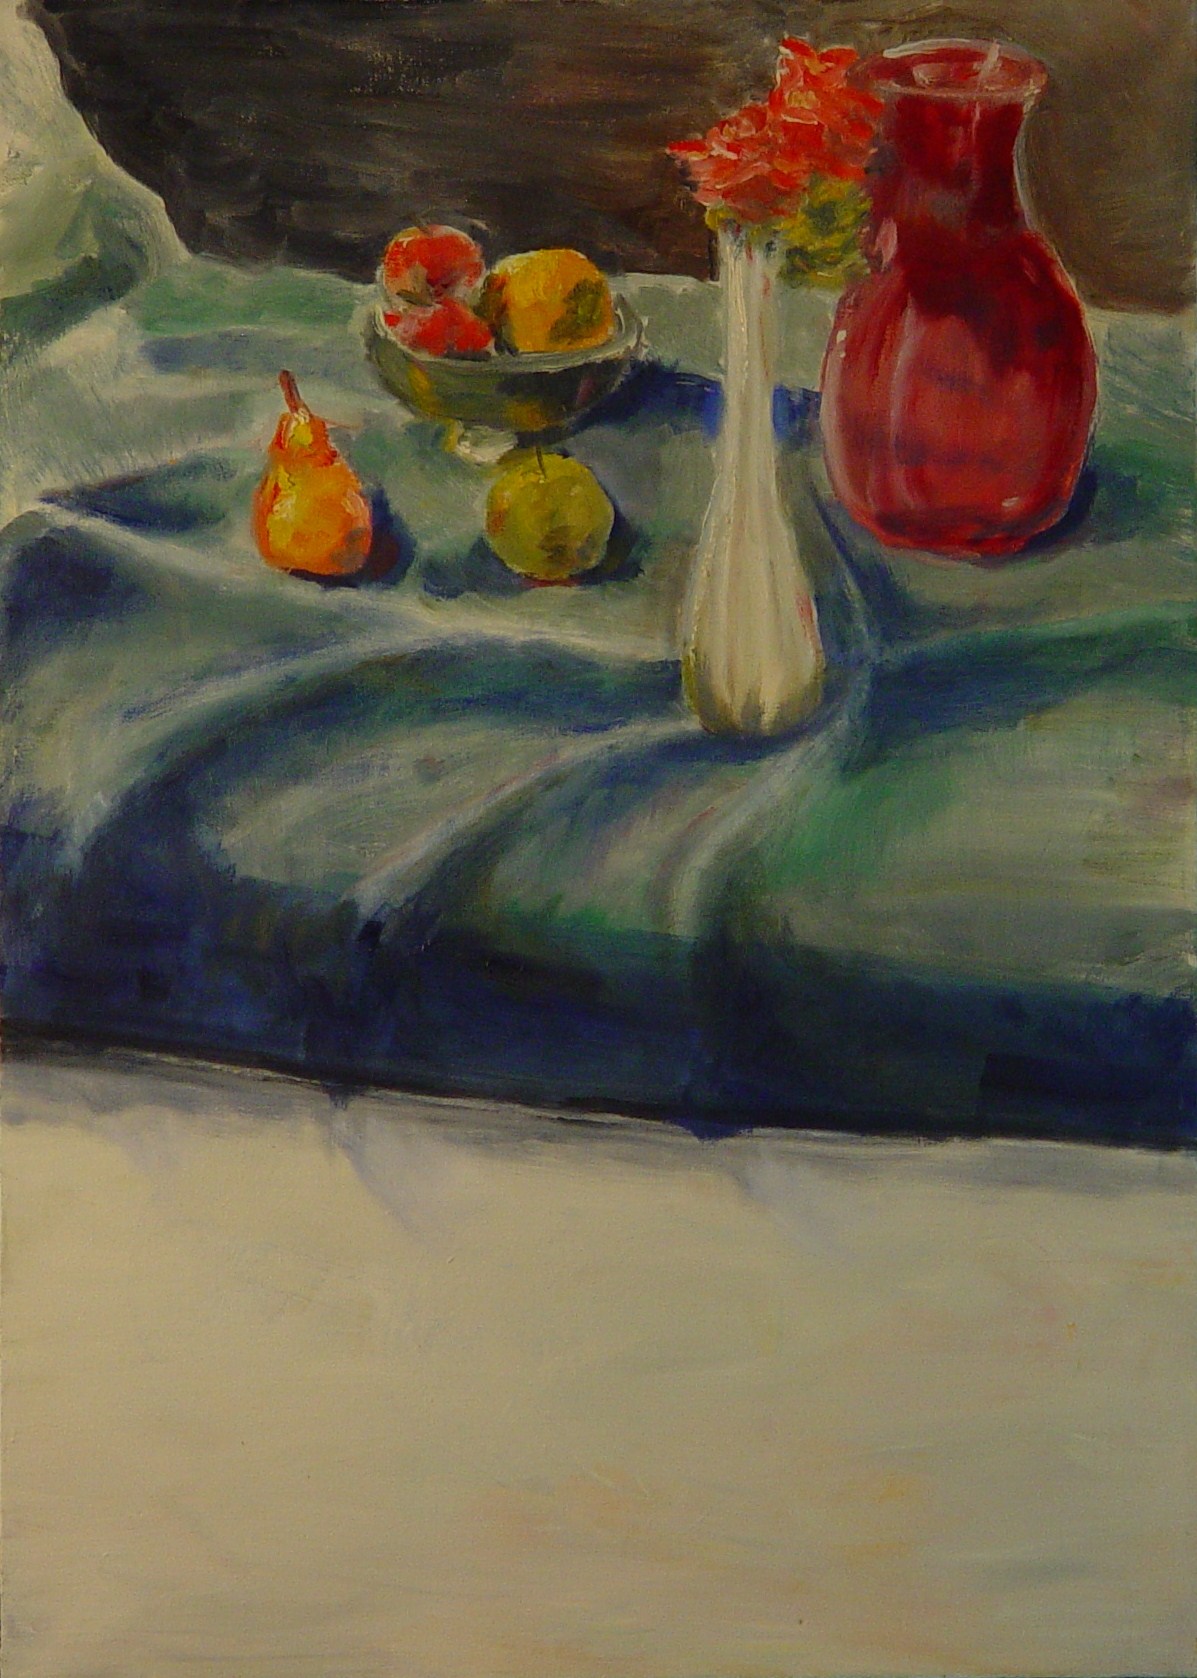 Fruit and Vases on Blue Cloth